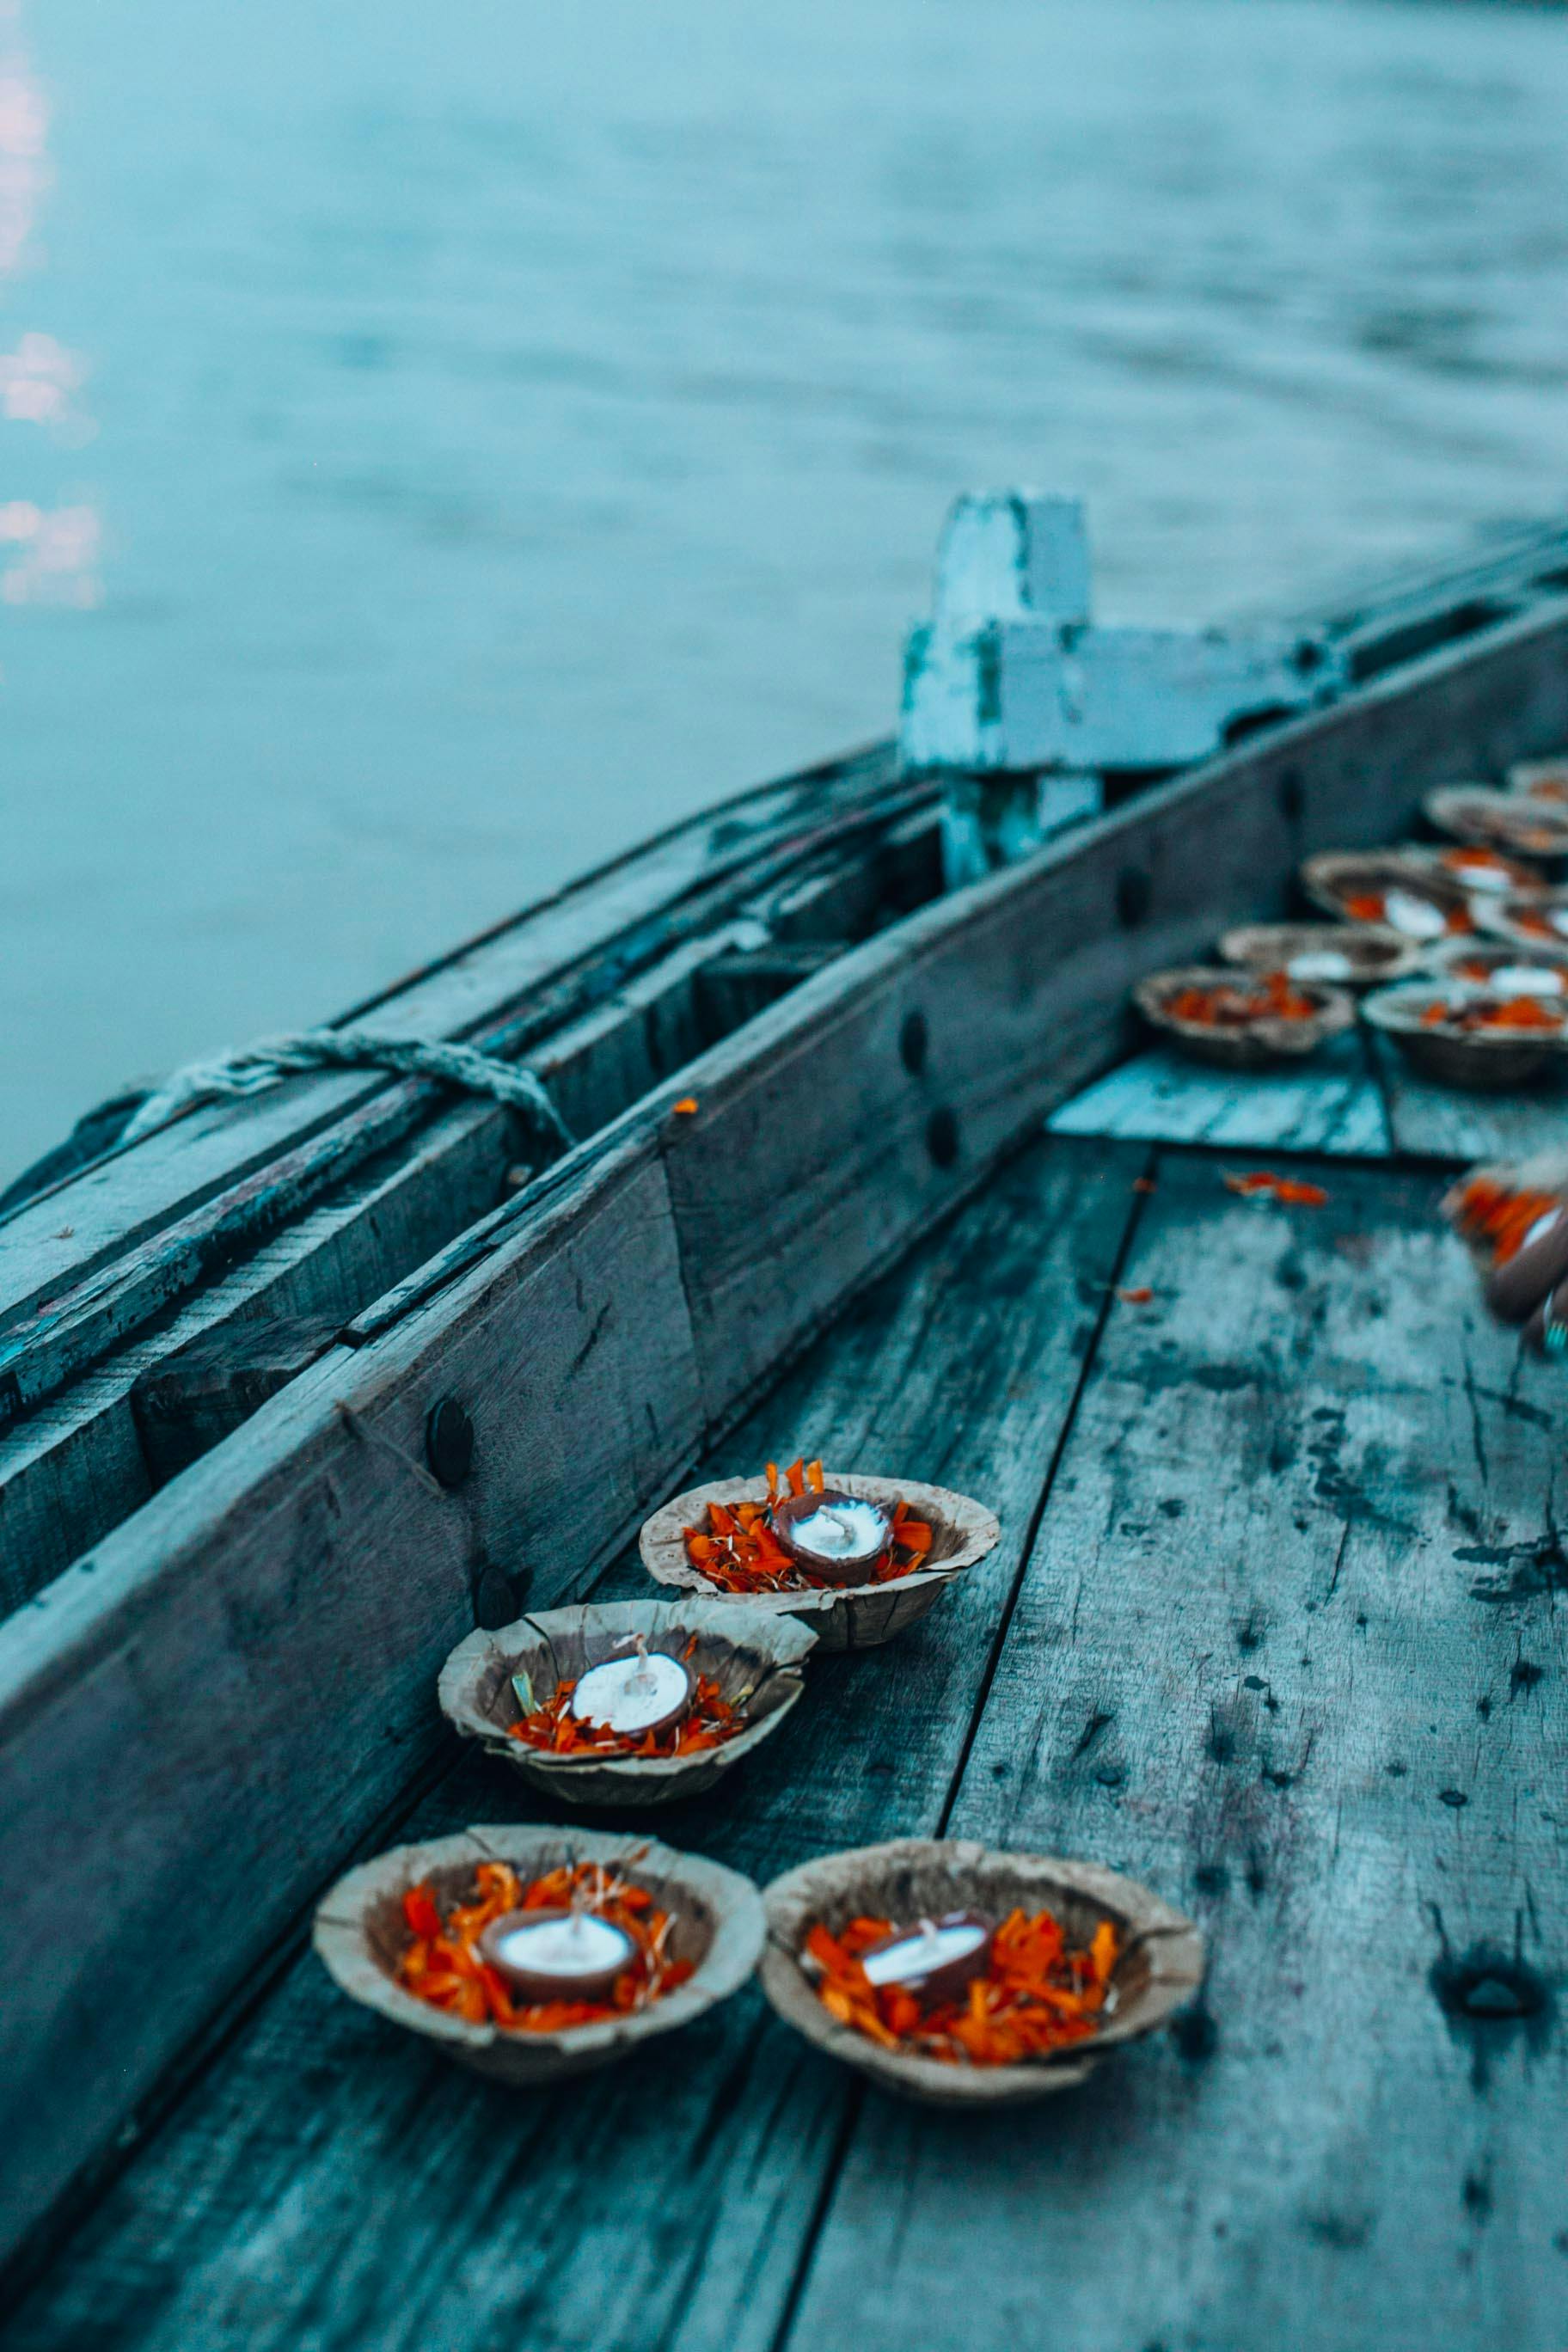 candles in little bowls on an old wooden boat deck